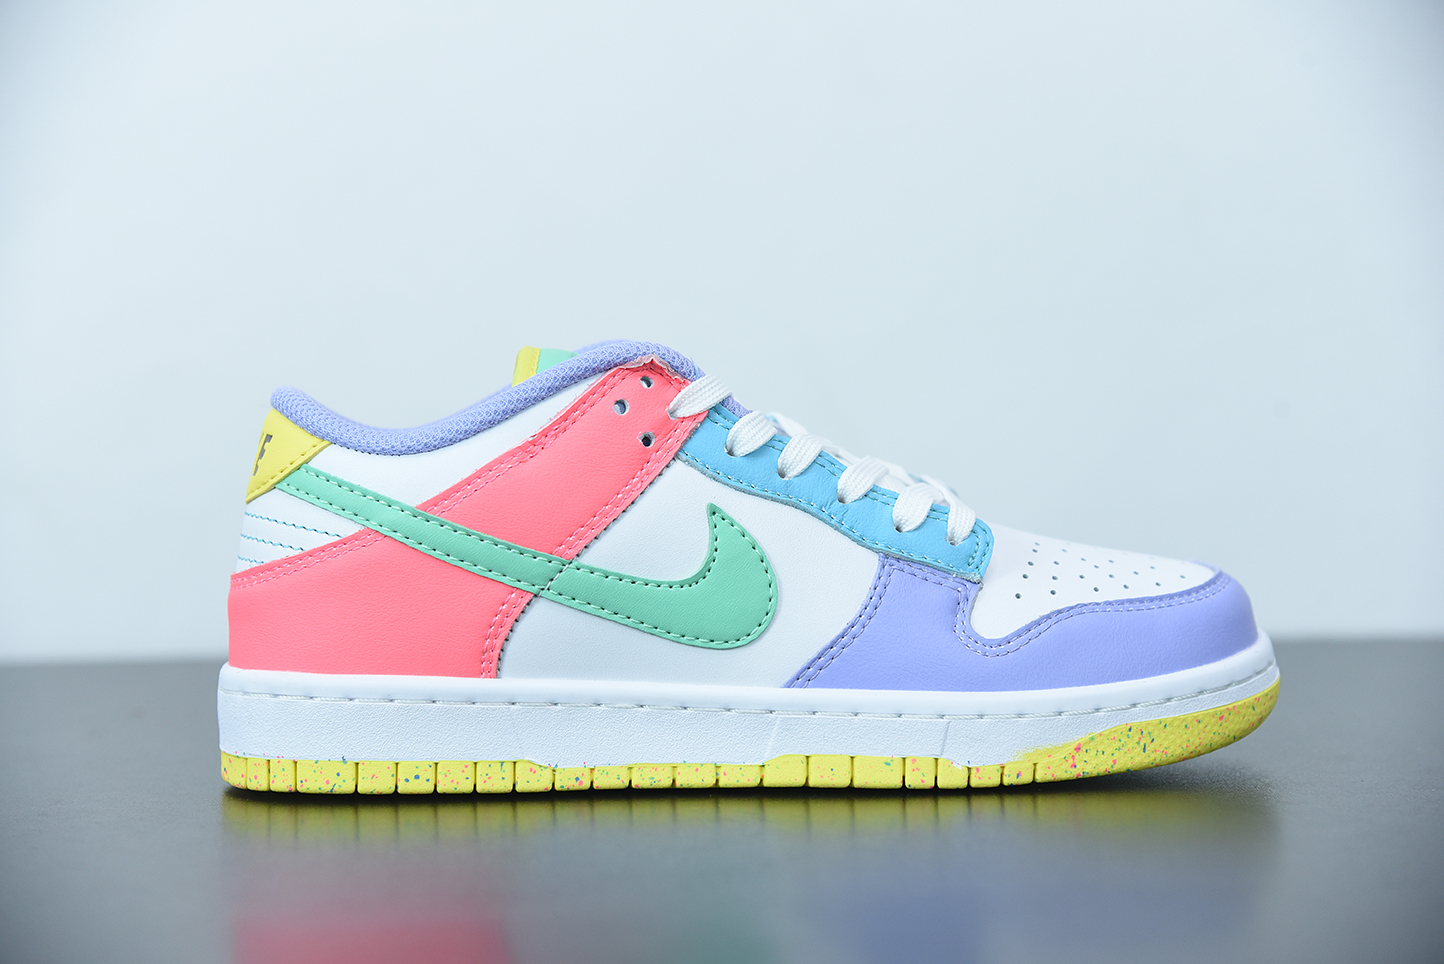 Nike Dunk Low WMNS “Easter” White/Green Glow - женские шлепанцы 